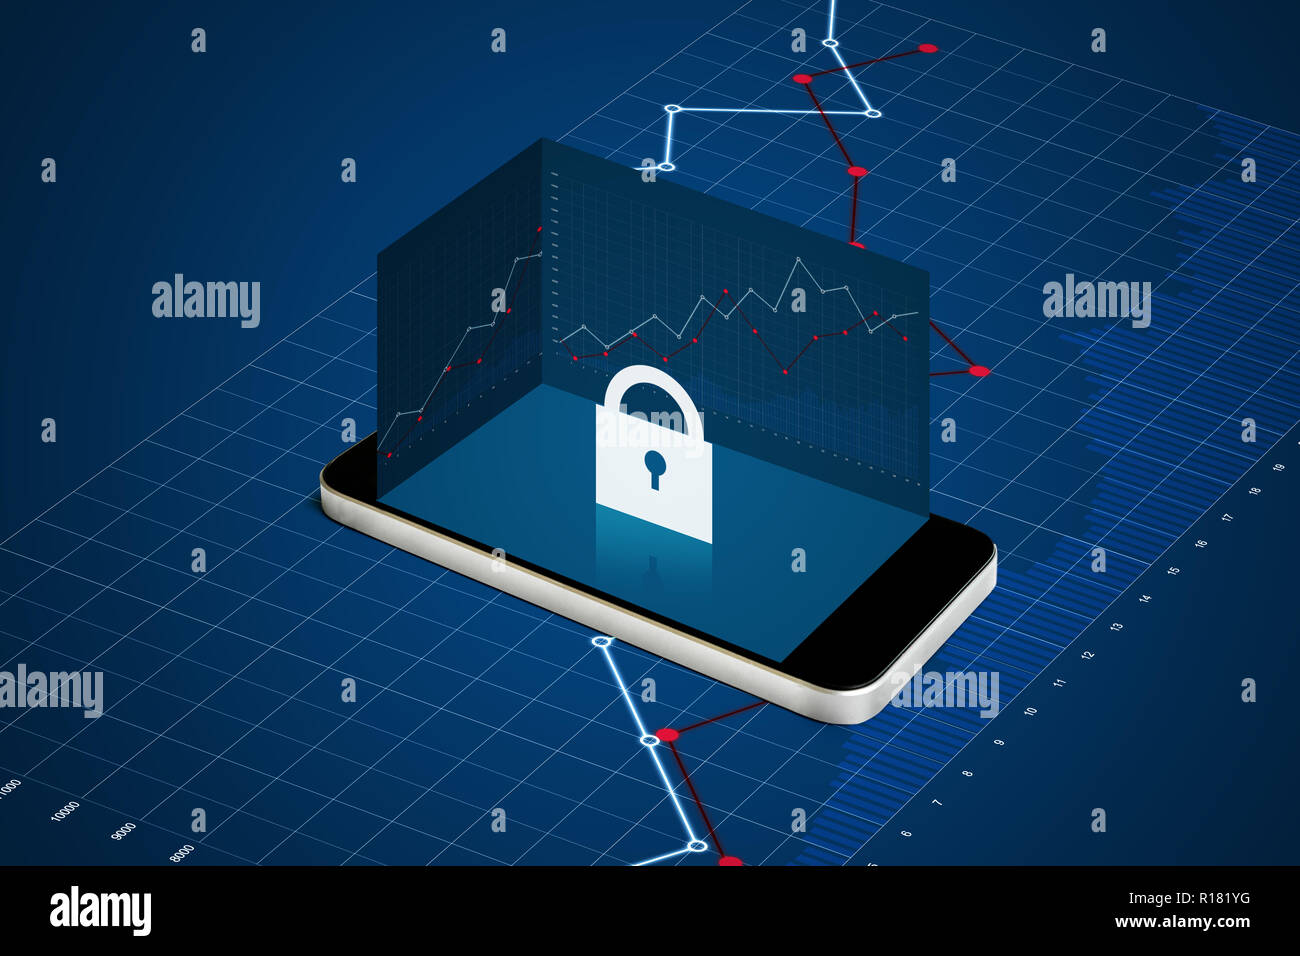 Mobile Network Security System Technologie Stockfoto